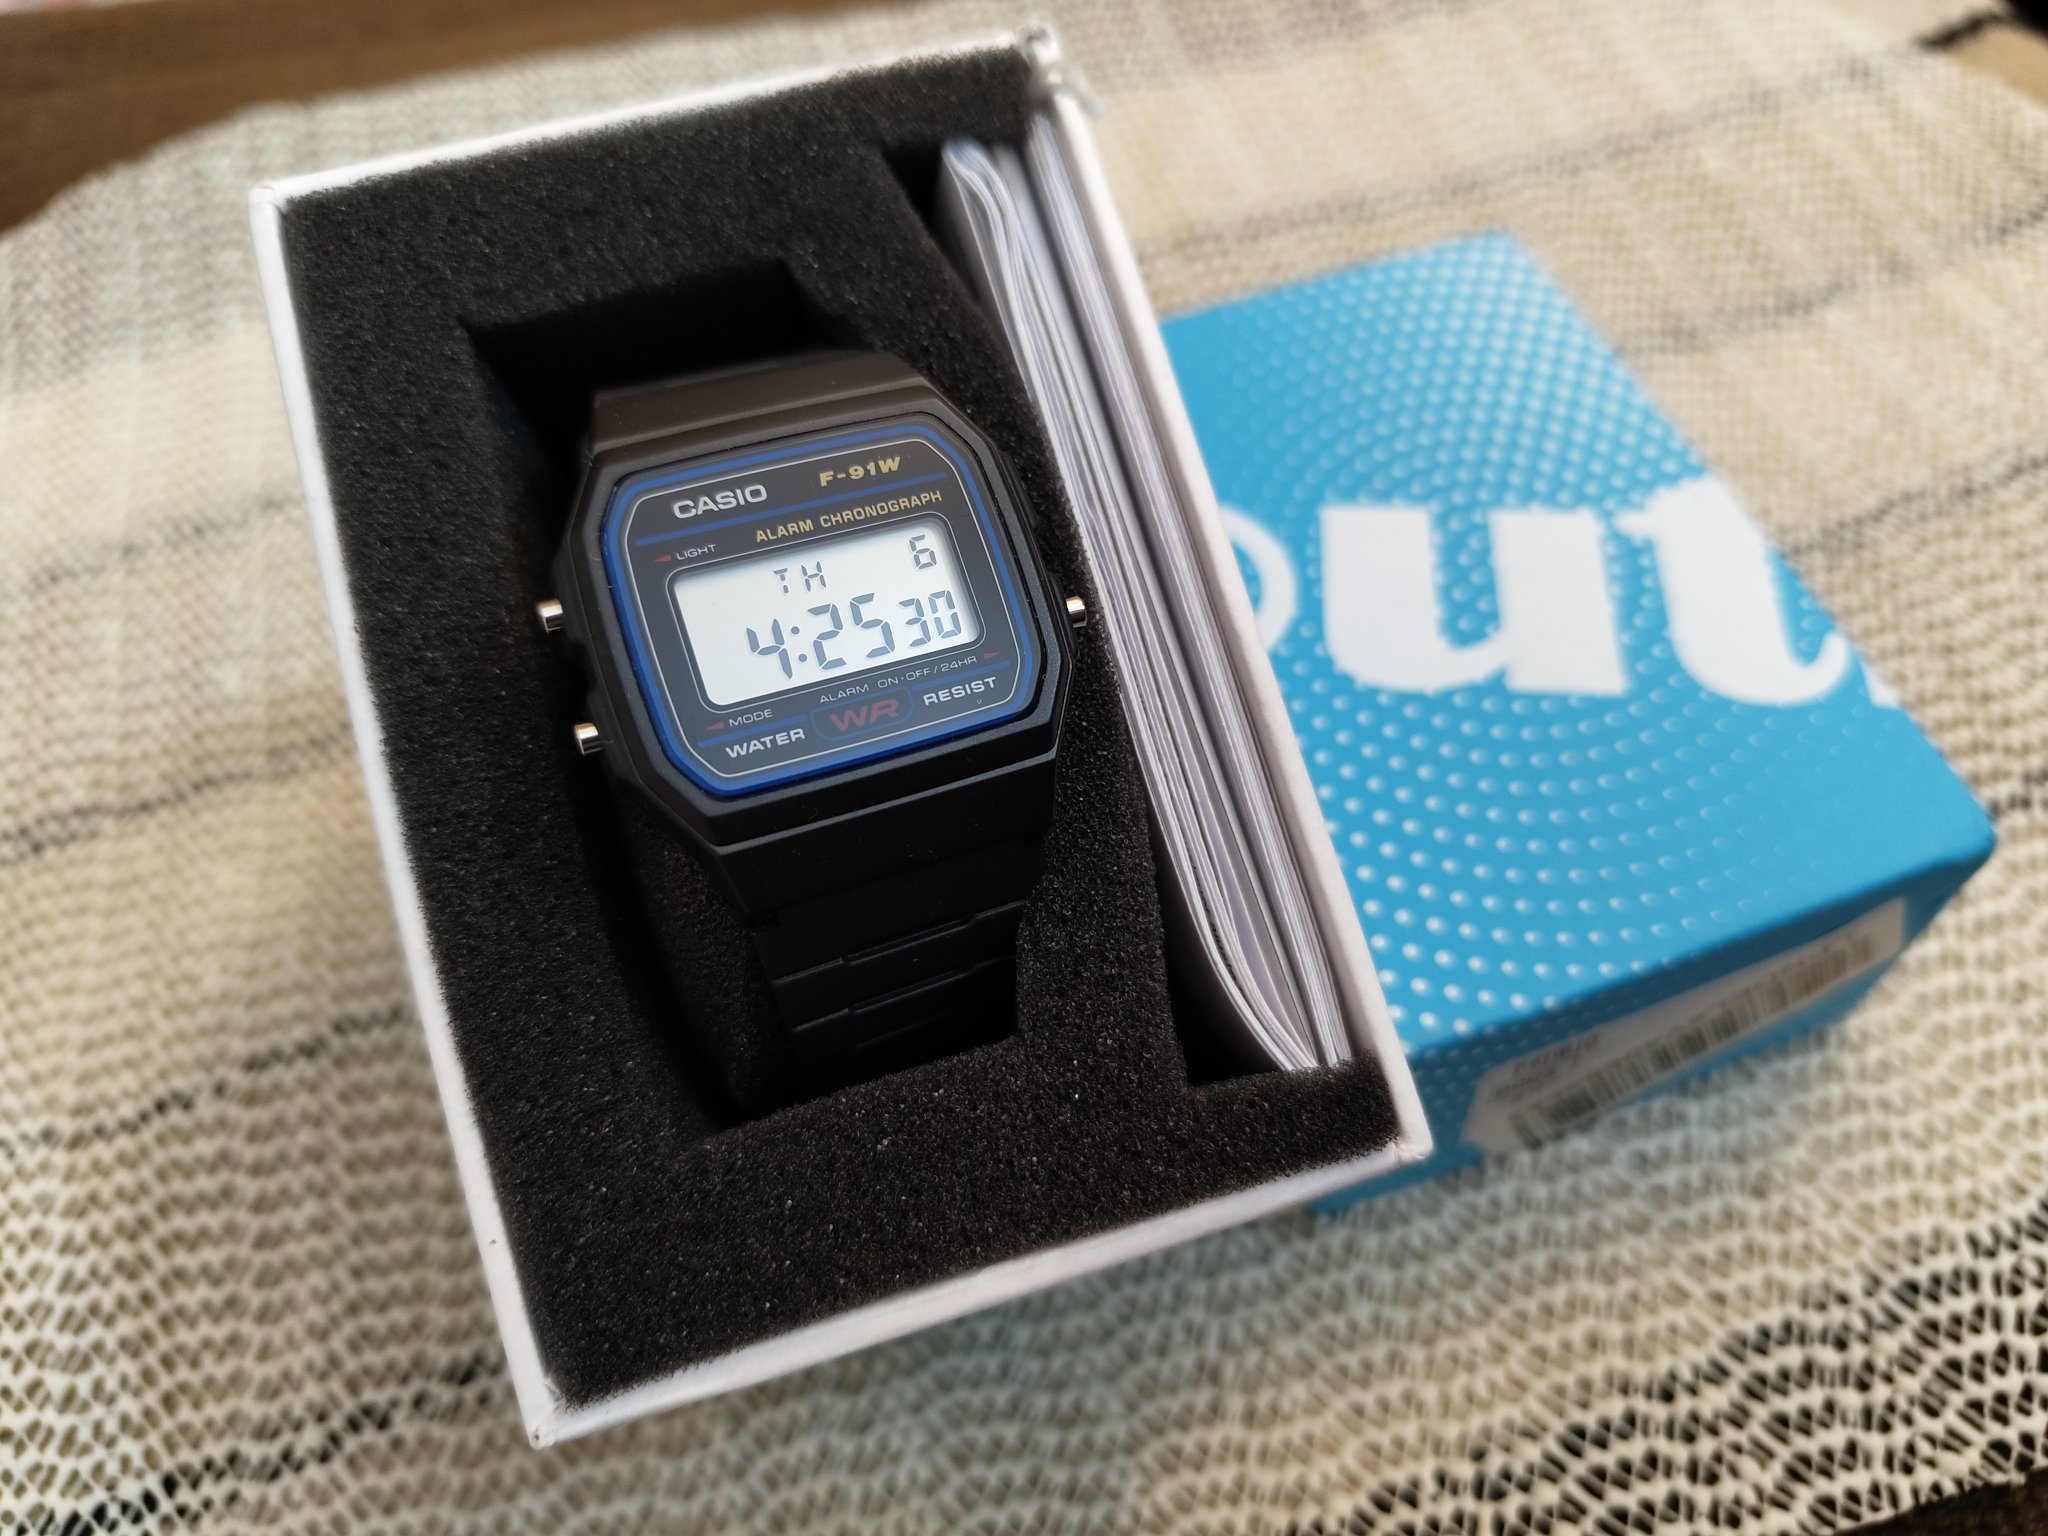 eksplicit Feasibility Messing Parth Monish Kohli on Twitter: "I have a piece of history with me: The  legendary - Casio F-91W. This watch was worn by many celebrities back in  the 90s, and notably was